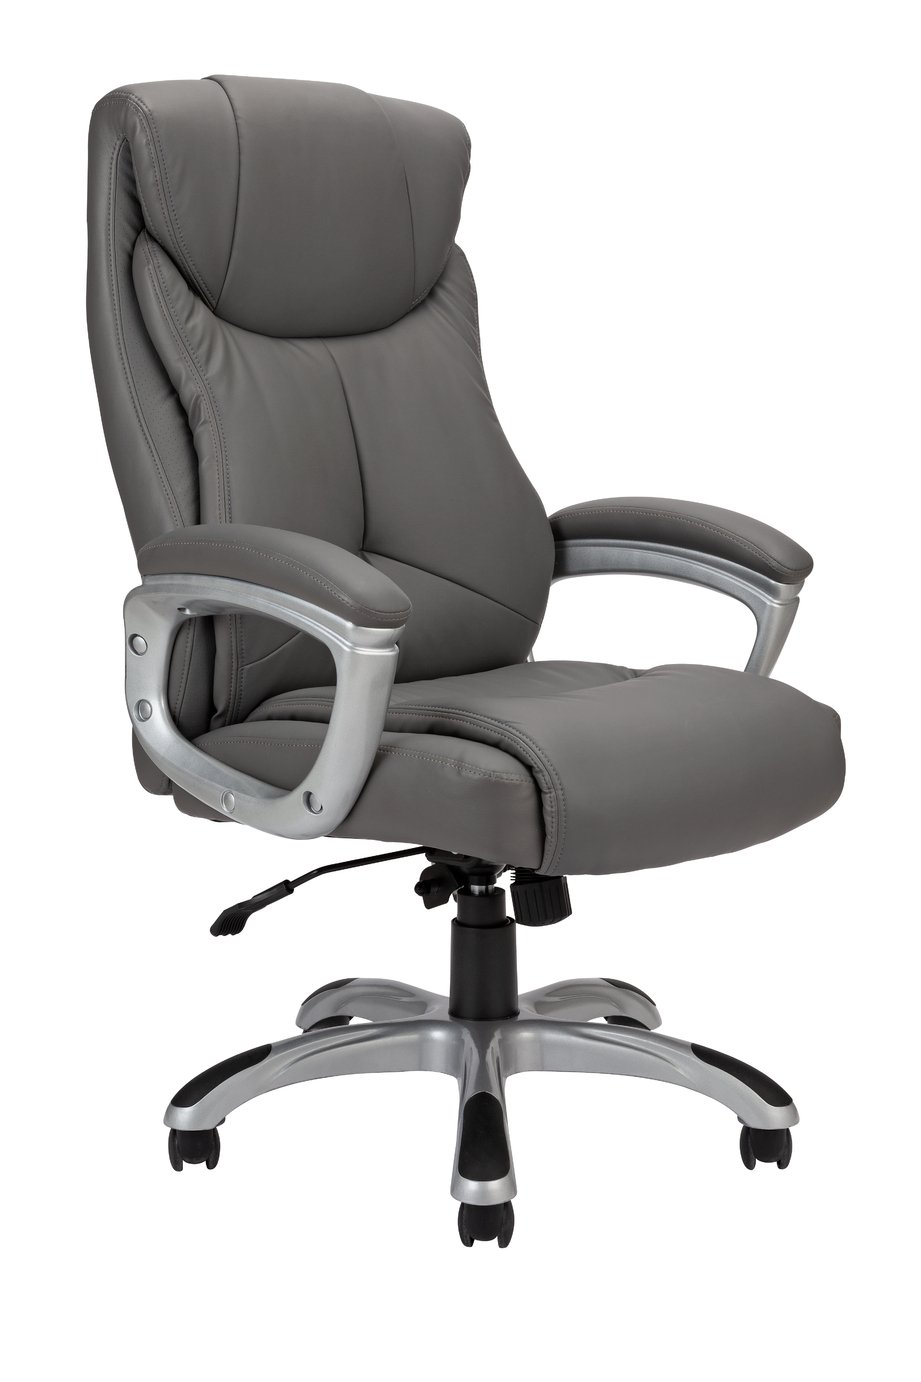 Office chairs | Page 1 | Argos Price Tracker | pricehistory.co.uk